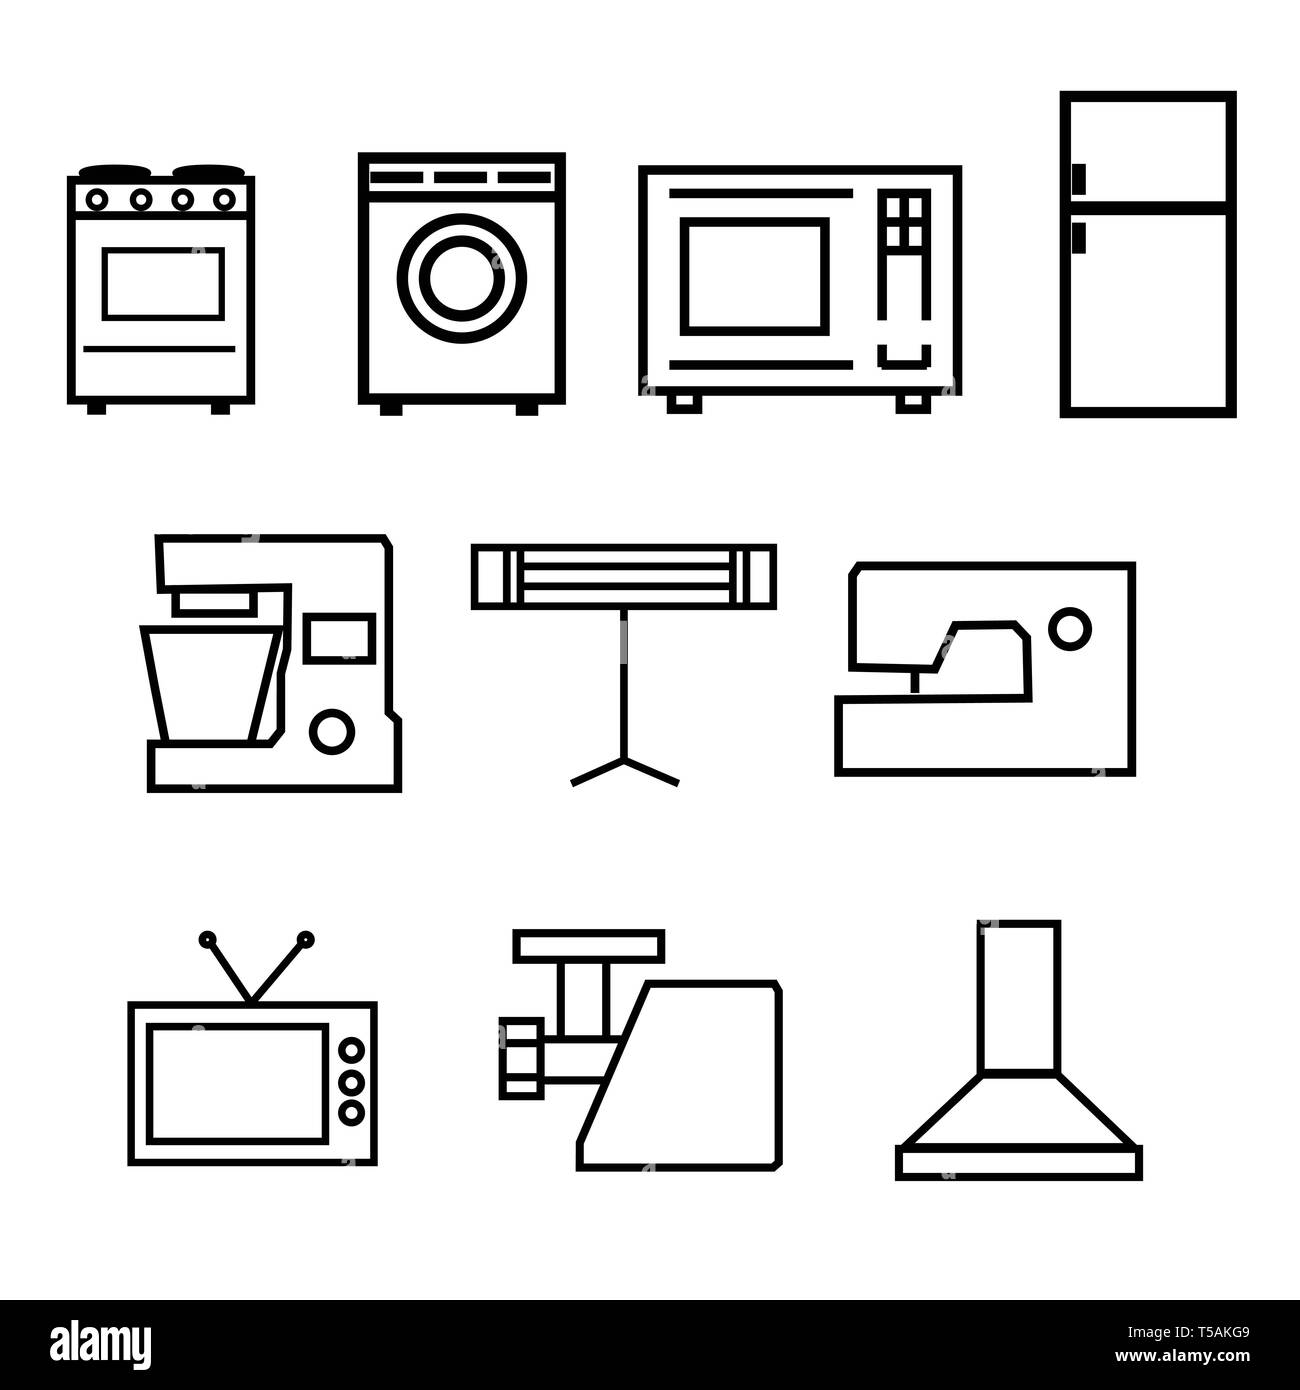 Set of household appliances icons. stove, washing machine, microwave ...